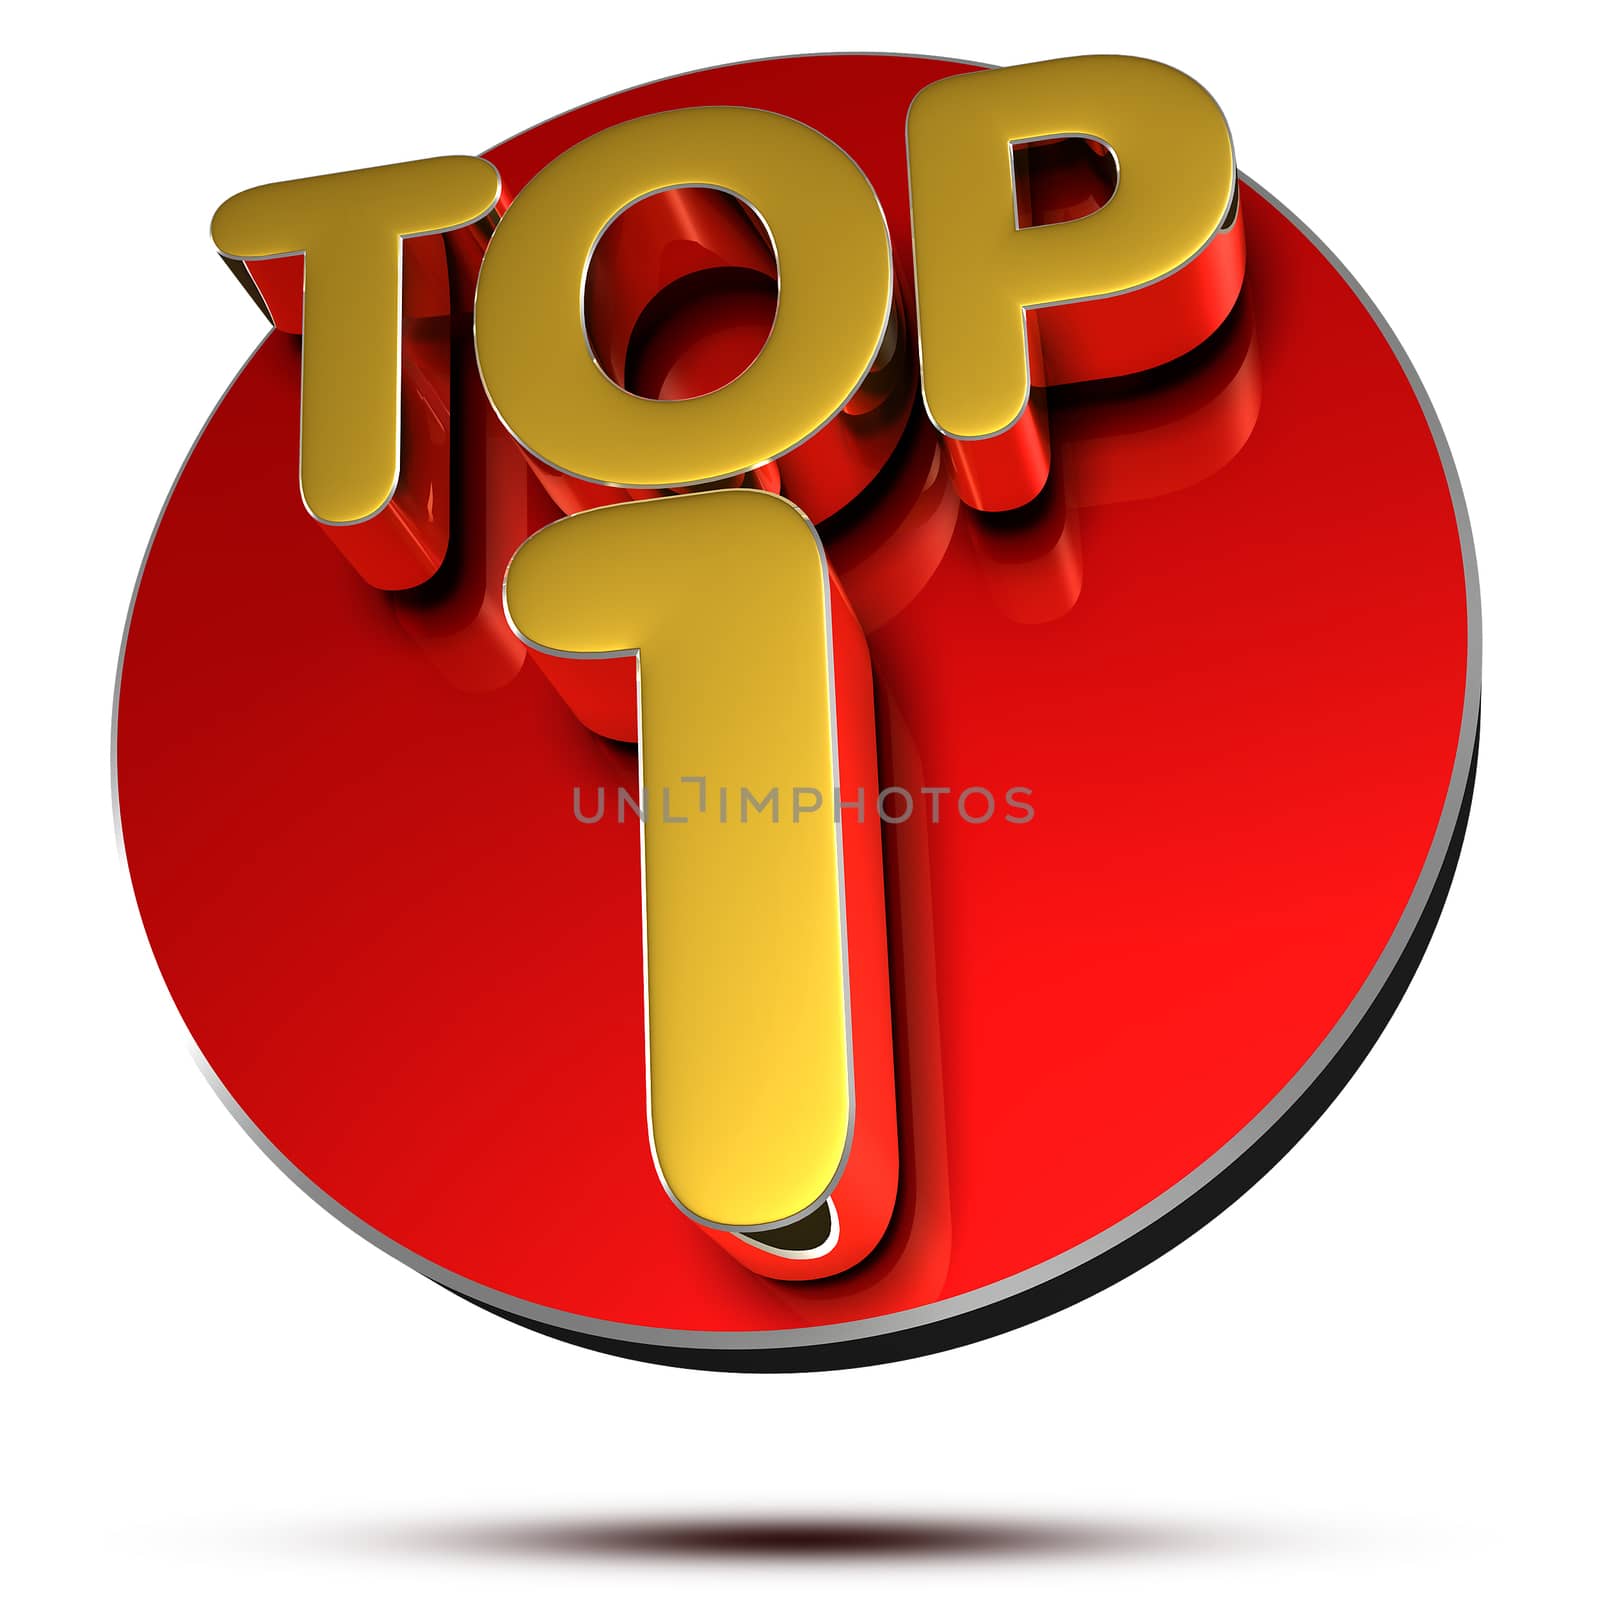 Top 1 3d rendering on white background.(with Clipping Path).